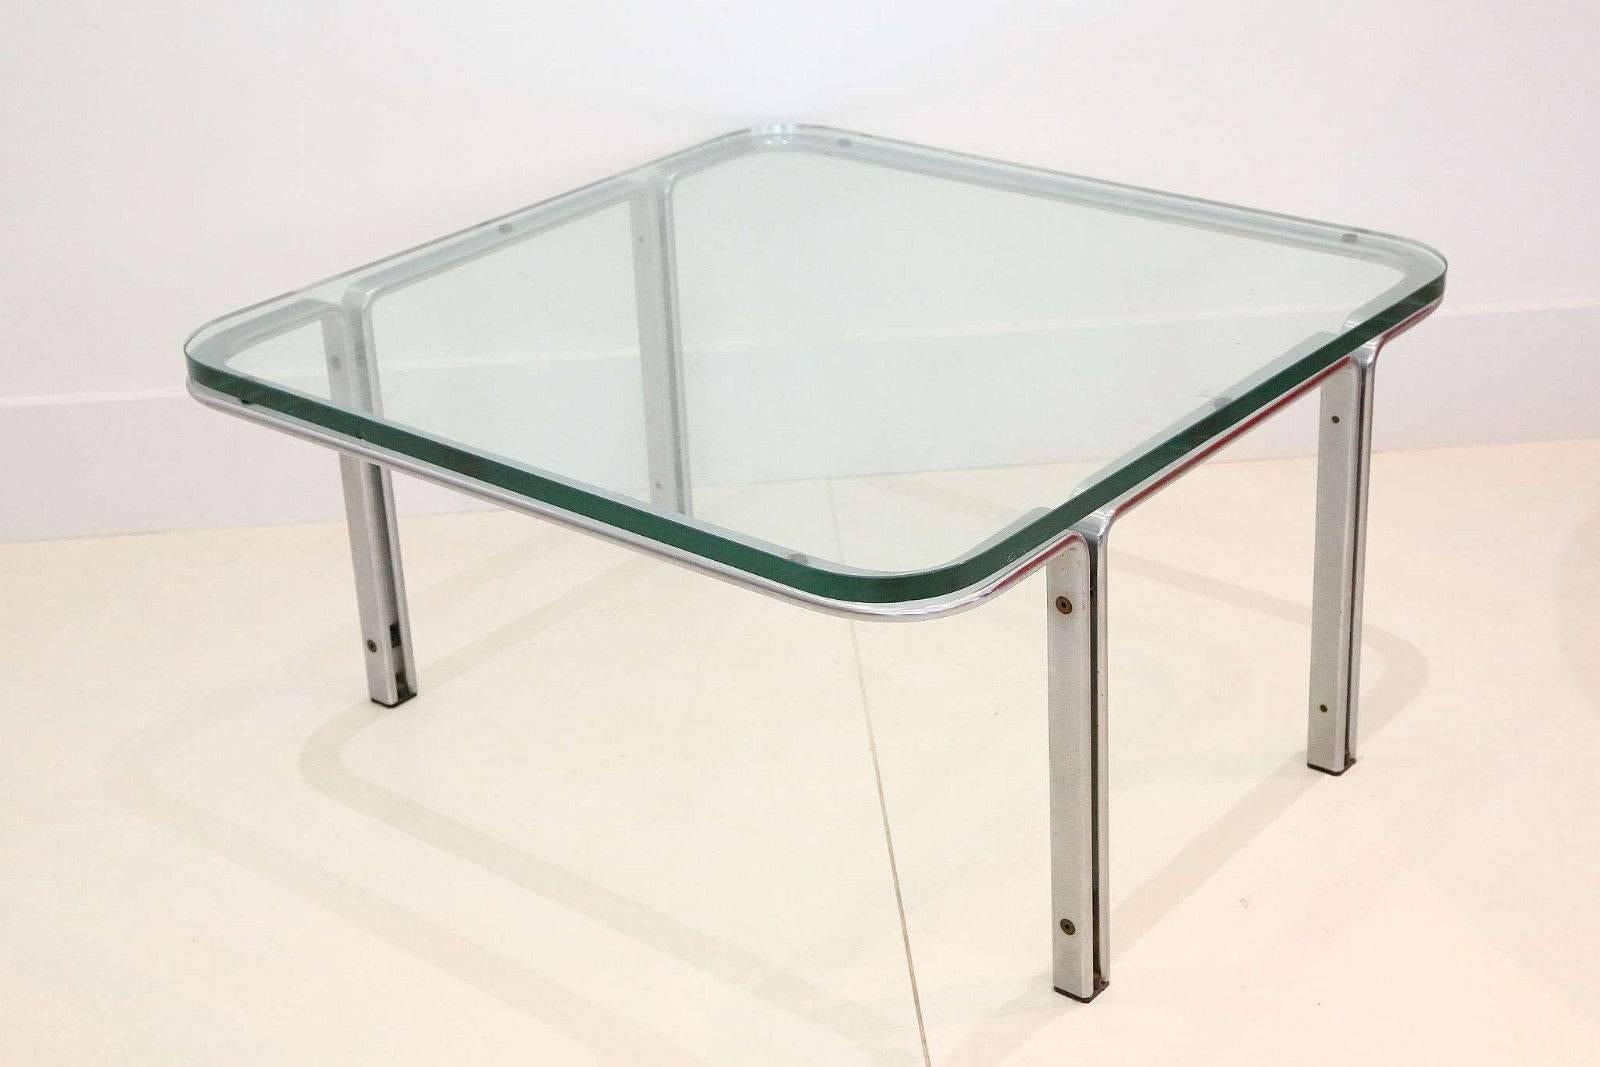 Mid-Century model T111 coffee table by Horst Brüning for Kill International

A 1960s German Model T111 square steel and glass coffee table designed by Horst Bruning, with glass top, on flat steel base.

Horst Brüning studied architecture and